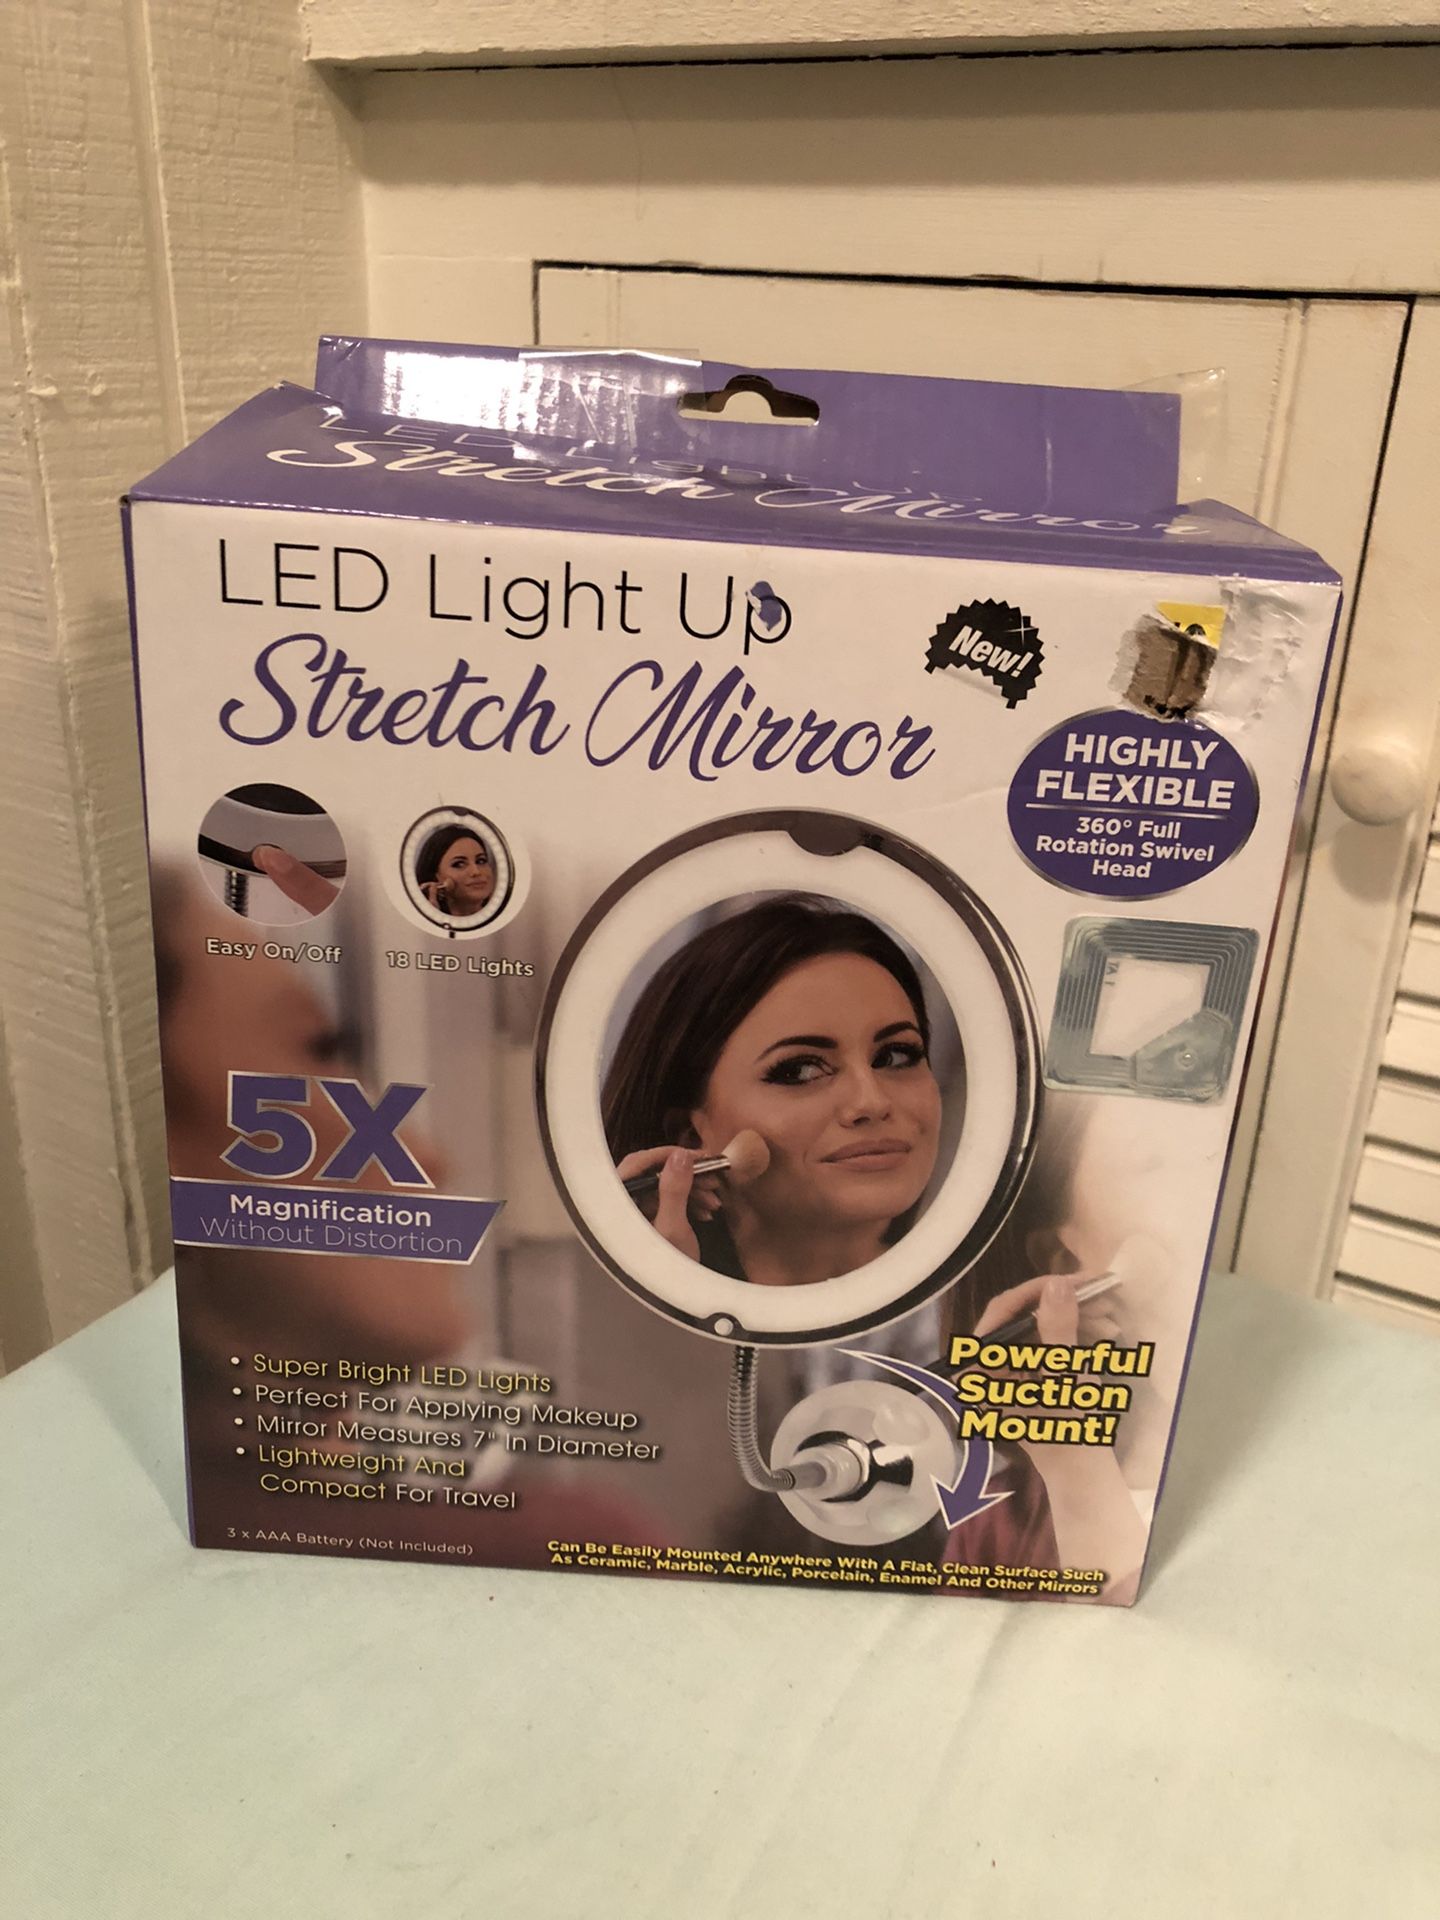 Suction Mirror for any room